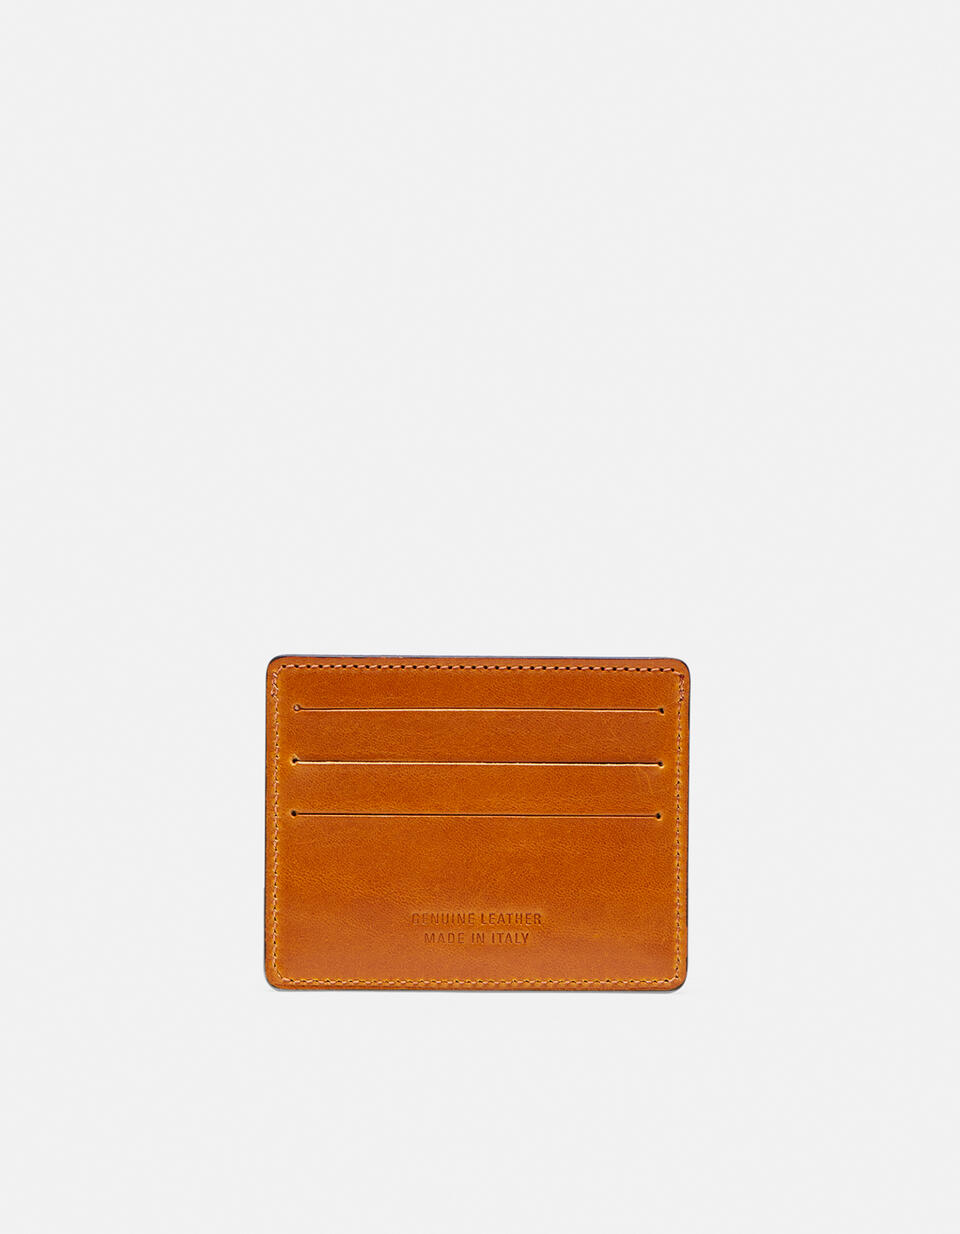 Card holder with banknote holder - Card Holders - Women's Wallets | Wallets GIALLO - Card Holders - Women's Wallets | WalletsCuoieria Fiorentina